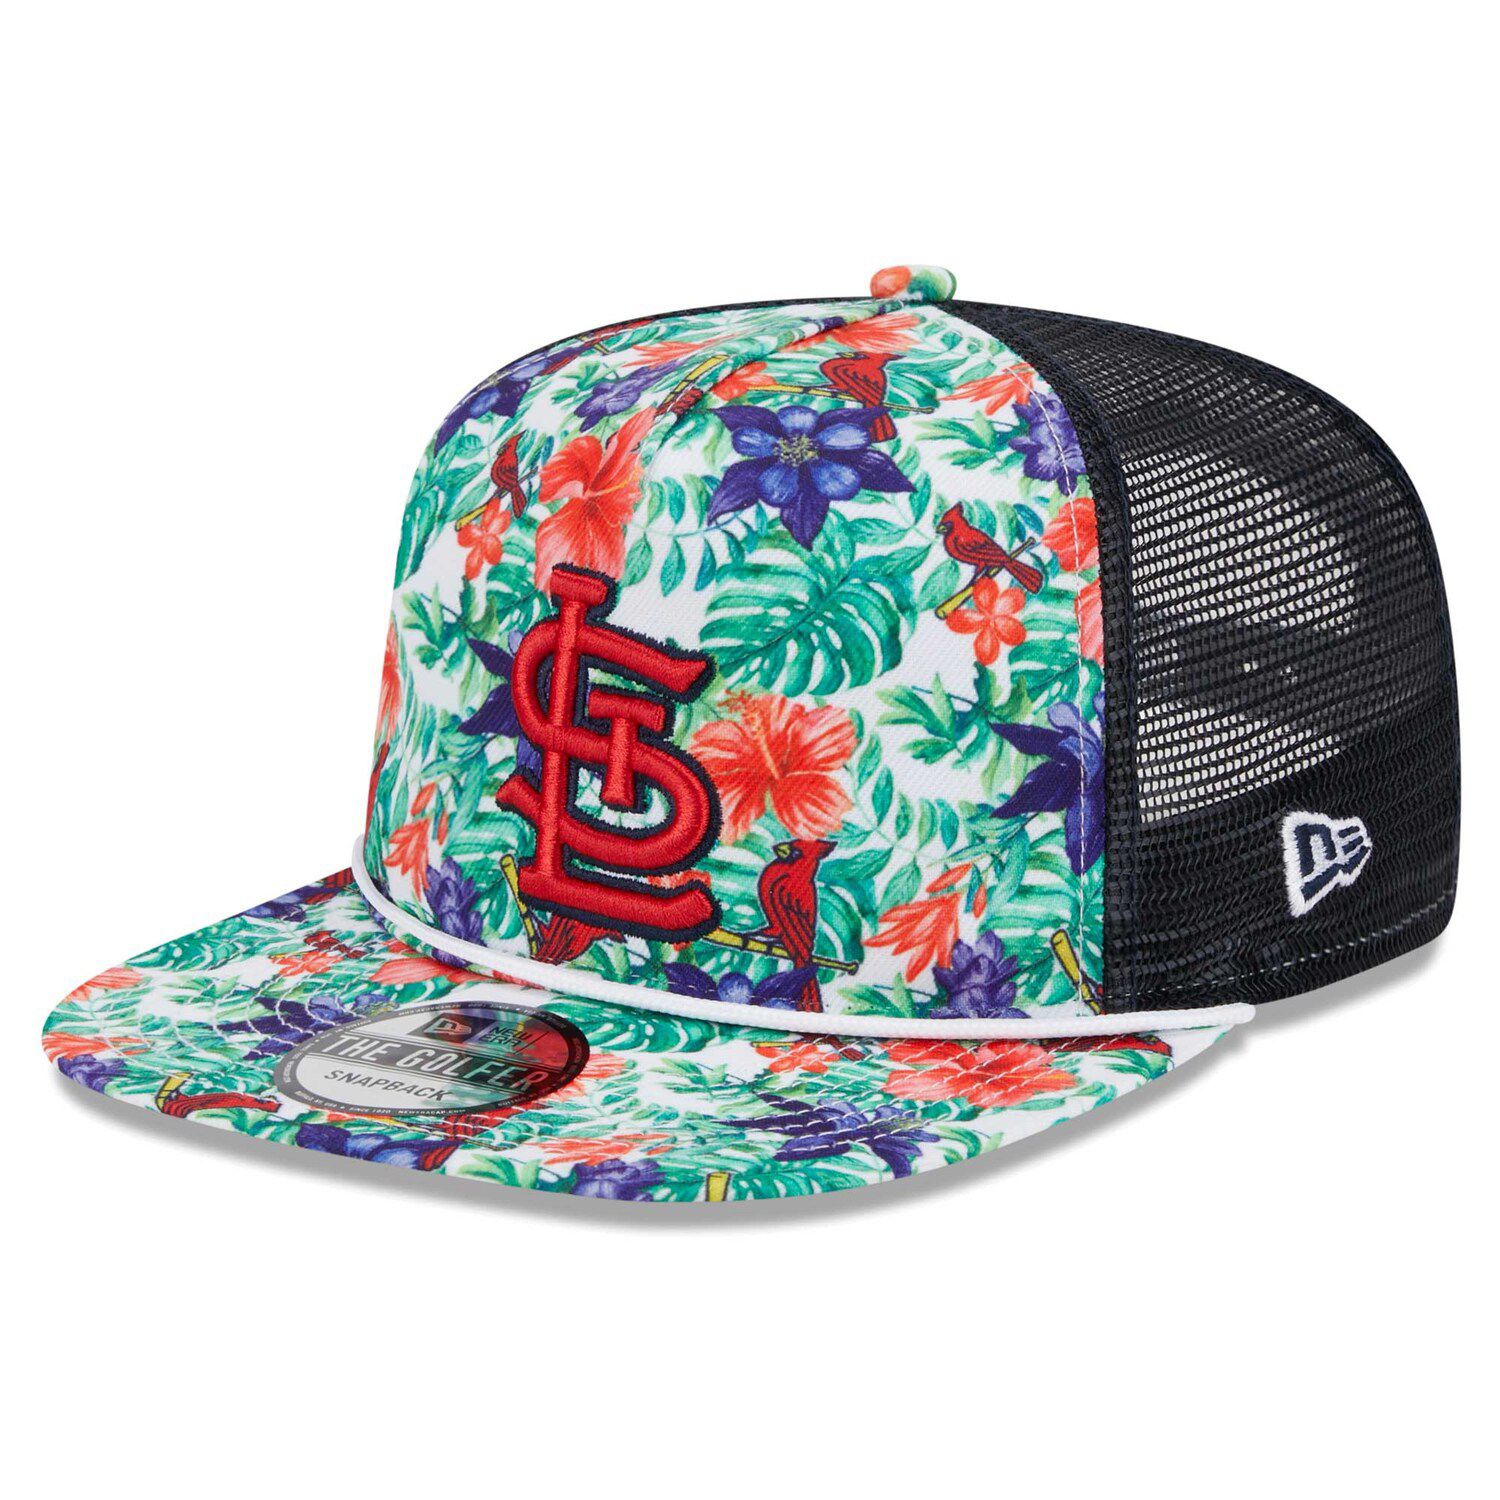 St. Louis Cardinals Mitchell & Ness Cooperstown Evergreen Pro Snapback - White